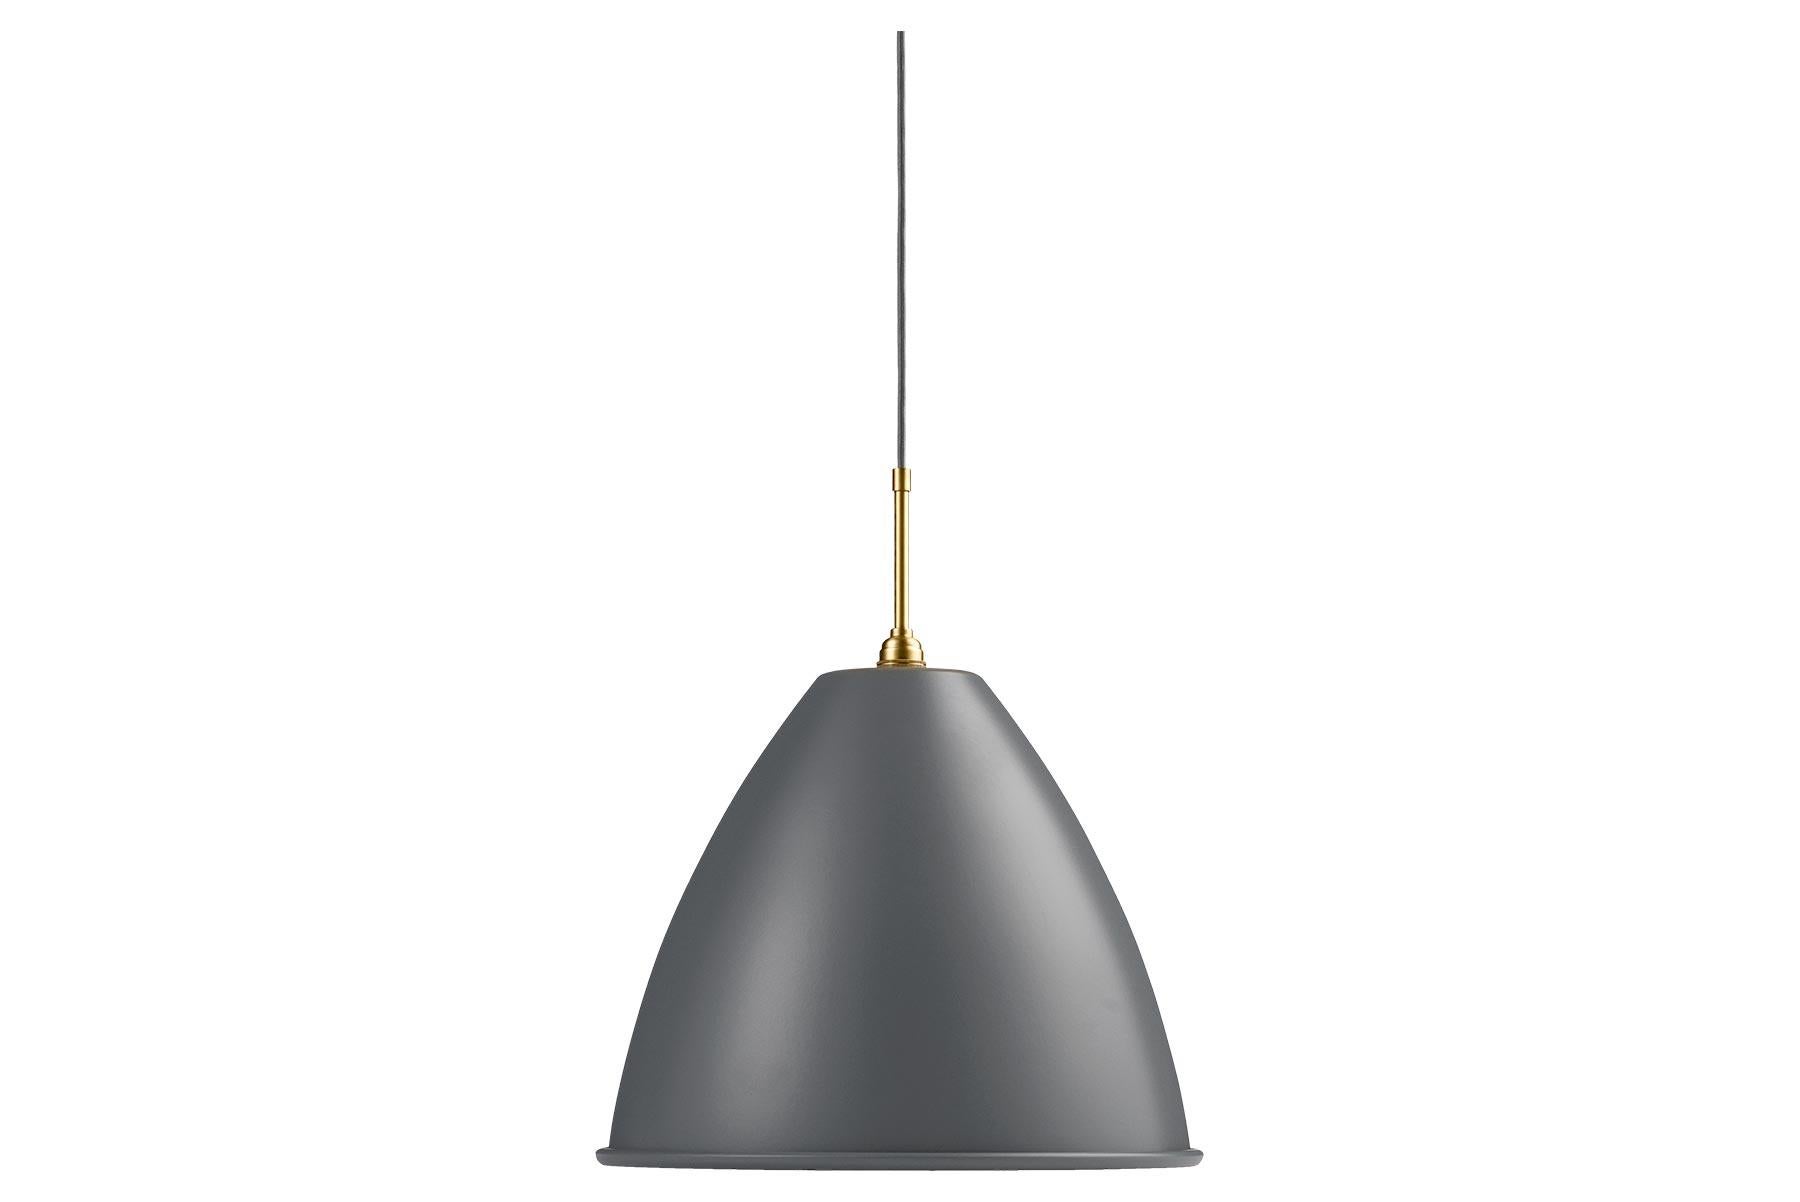 The Bestlite BL9 pendant in four sizes and in a numerous of finishes was designed in 1930 by the Bauhaus influenced British designer Robert Dudley Best. With its great heritage and contemporary look, the BL9 Pendant is a coveted design worldwide.